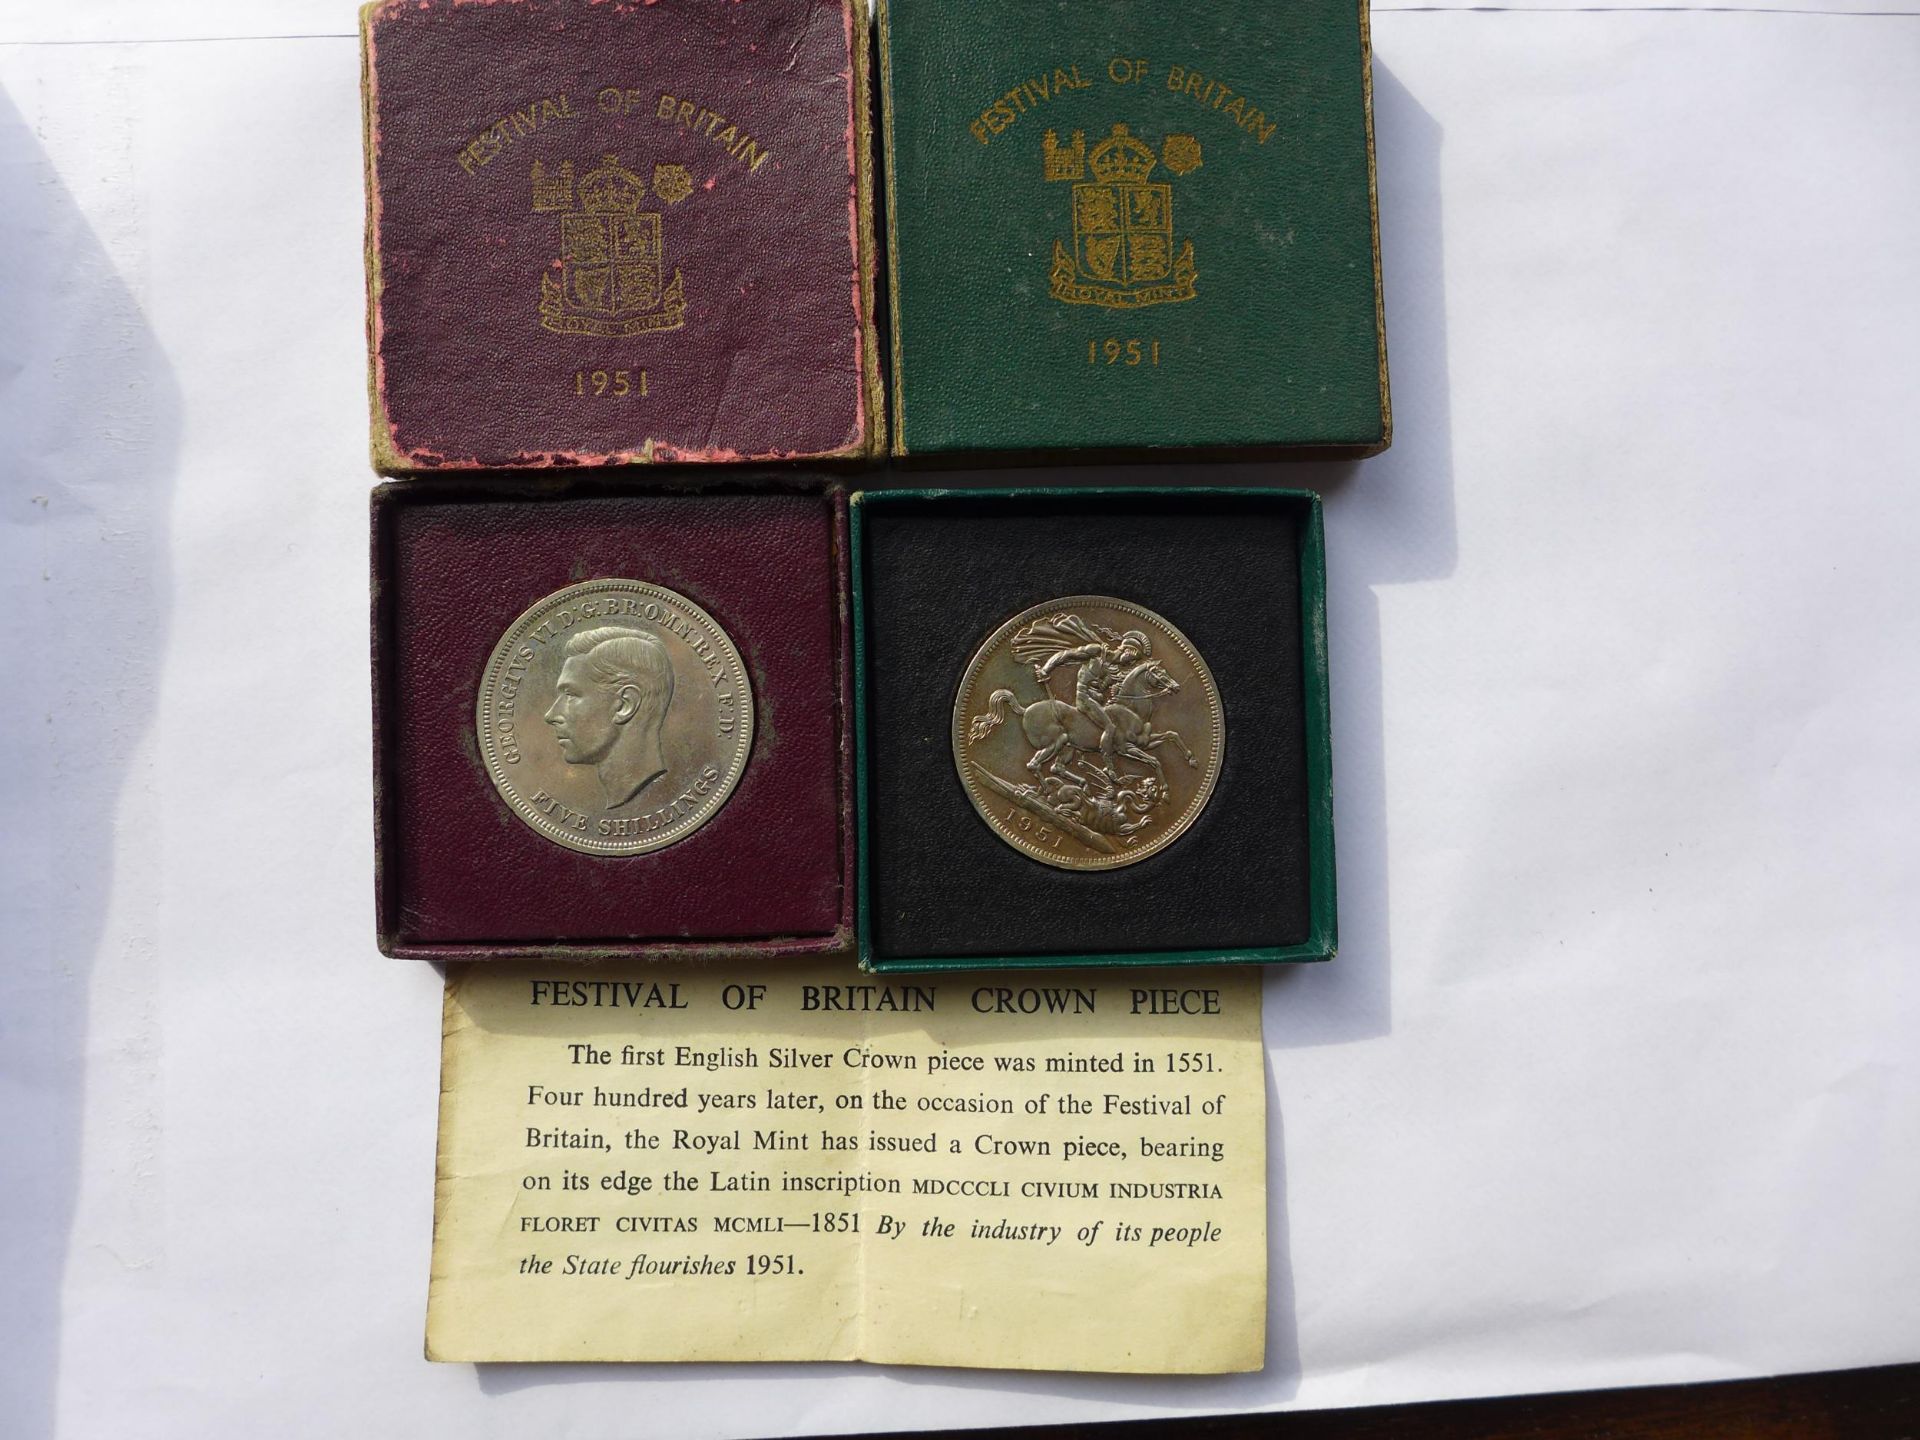 TWO BOXED GEORGE VI 1951 FESTIVAL OF BRITAIN CROWNS, IN GREEN AND MAROON BOXES